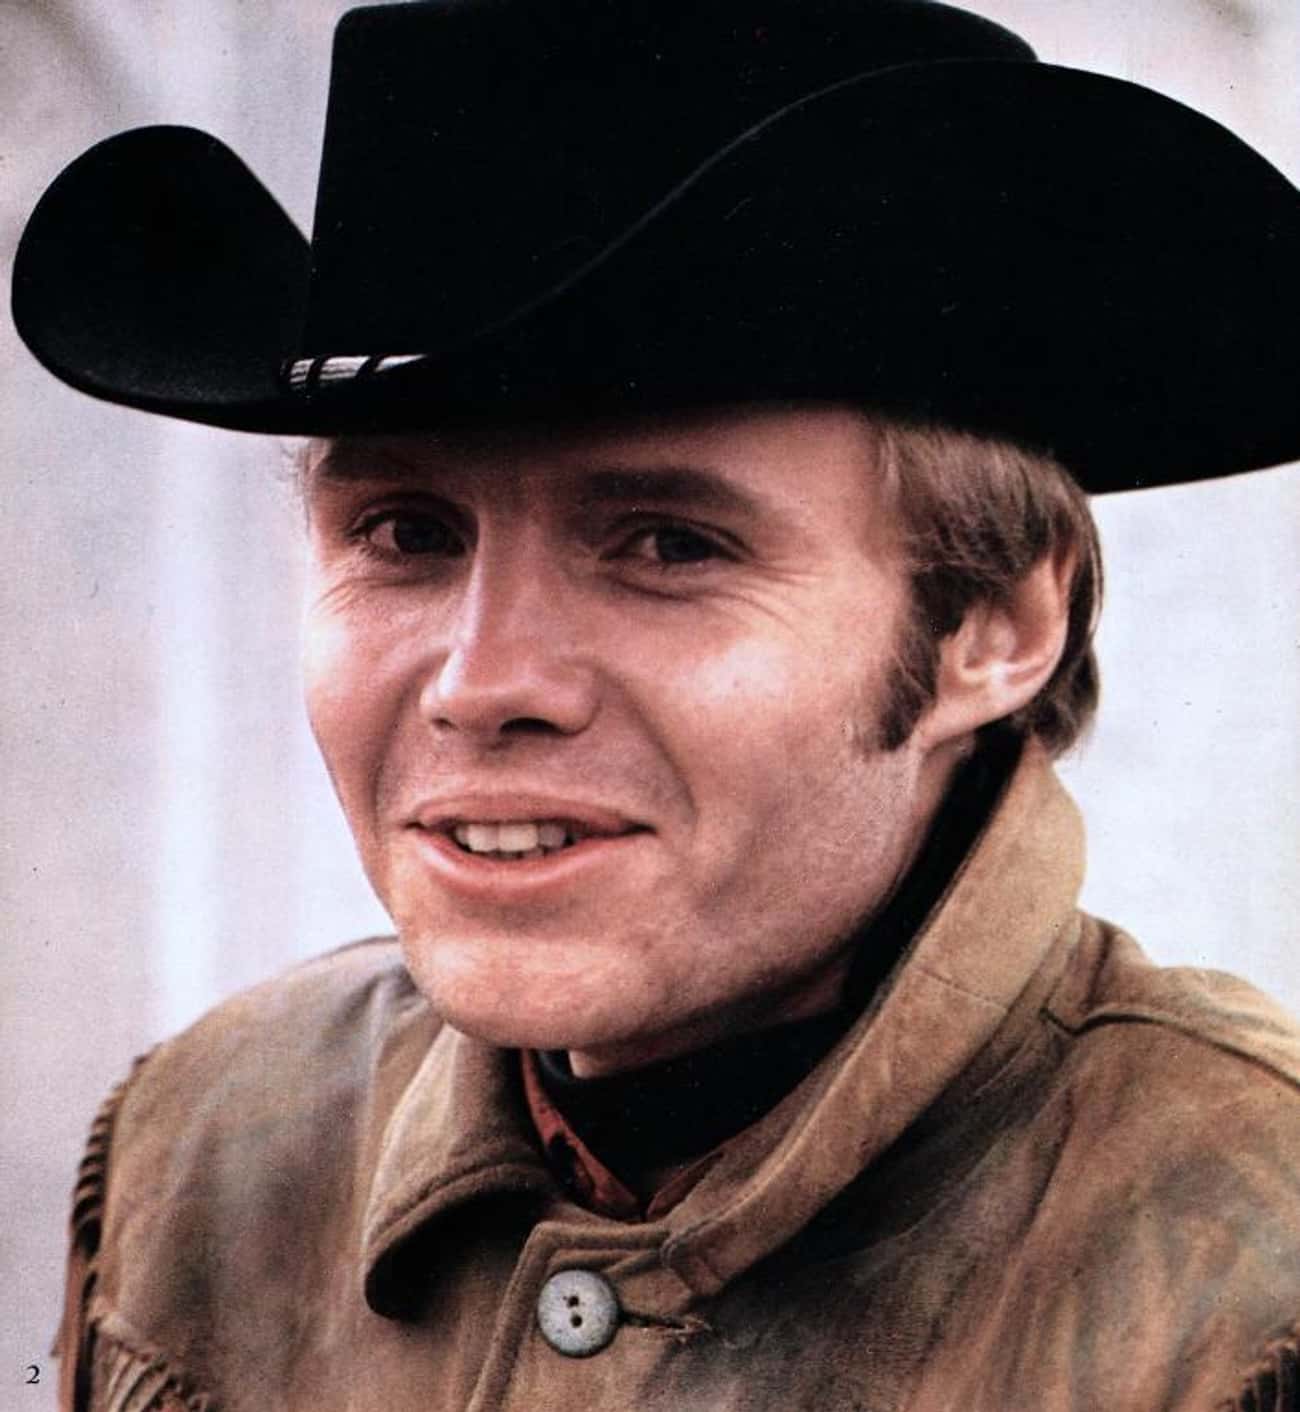 Young Jon Voight in Brown Leather Jacket and Black Cowboy Hat